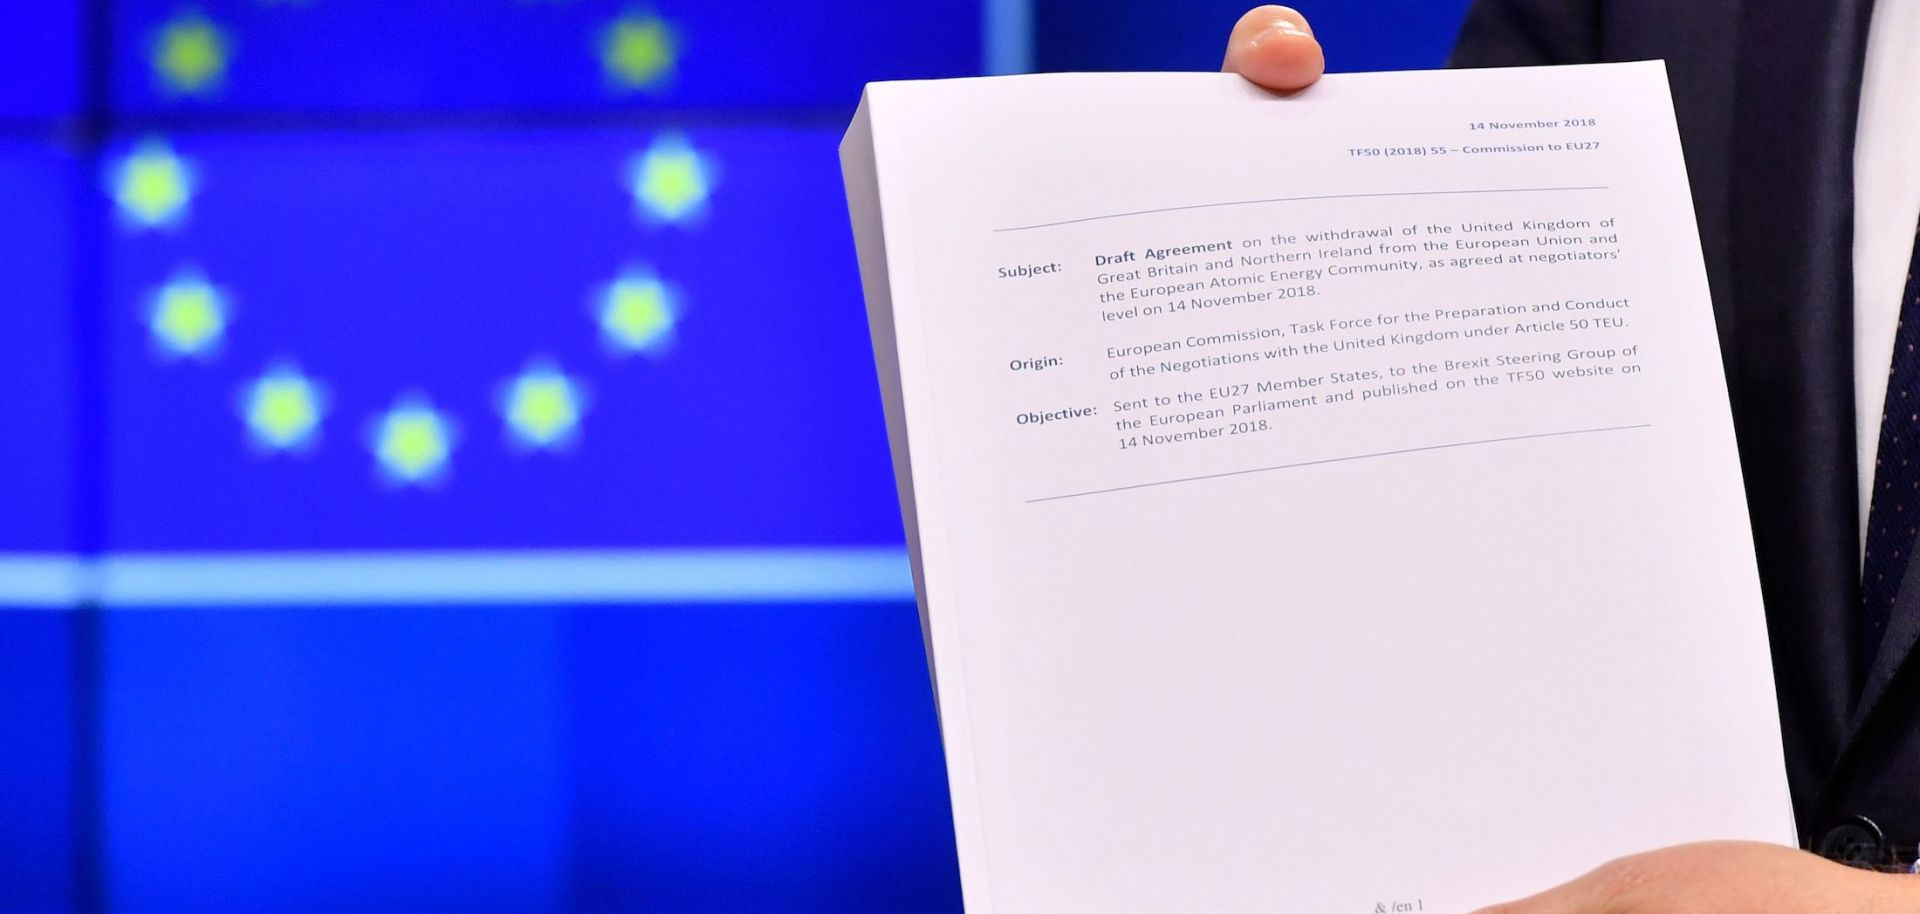 European Council President Donald Tusk holds the "draft agreement of the withdrawal of the United Kingdom of Great Britain and Northern Ireland from the European Union" during a press conference at the European Council in Brussels on Nov. 15.